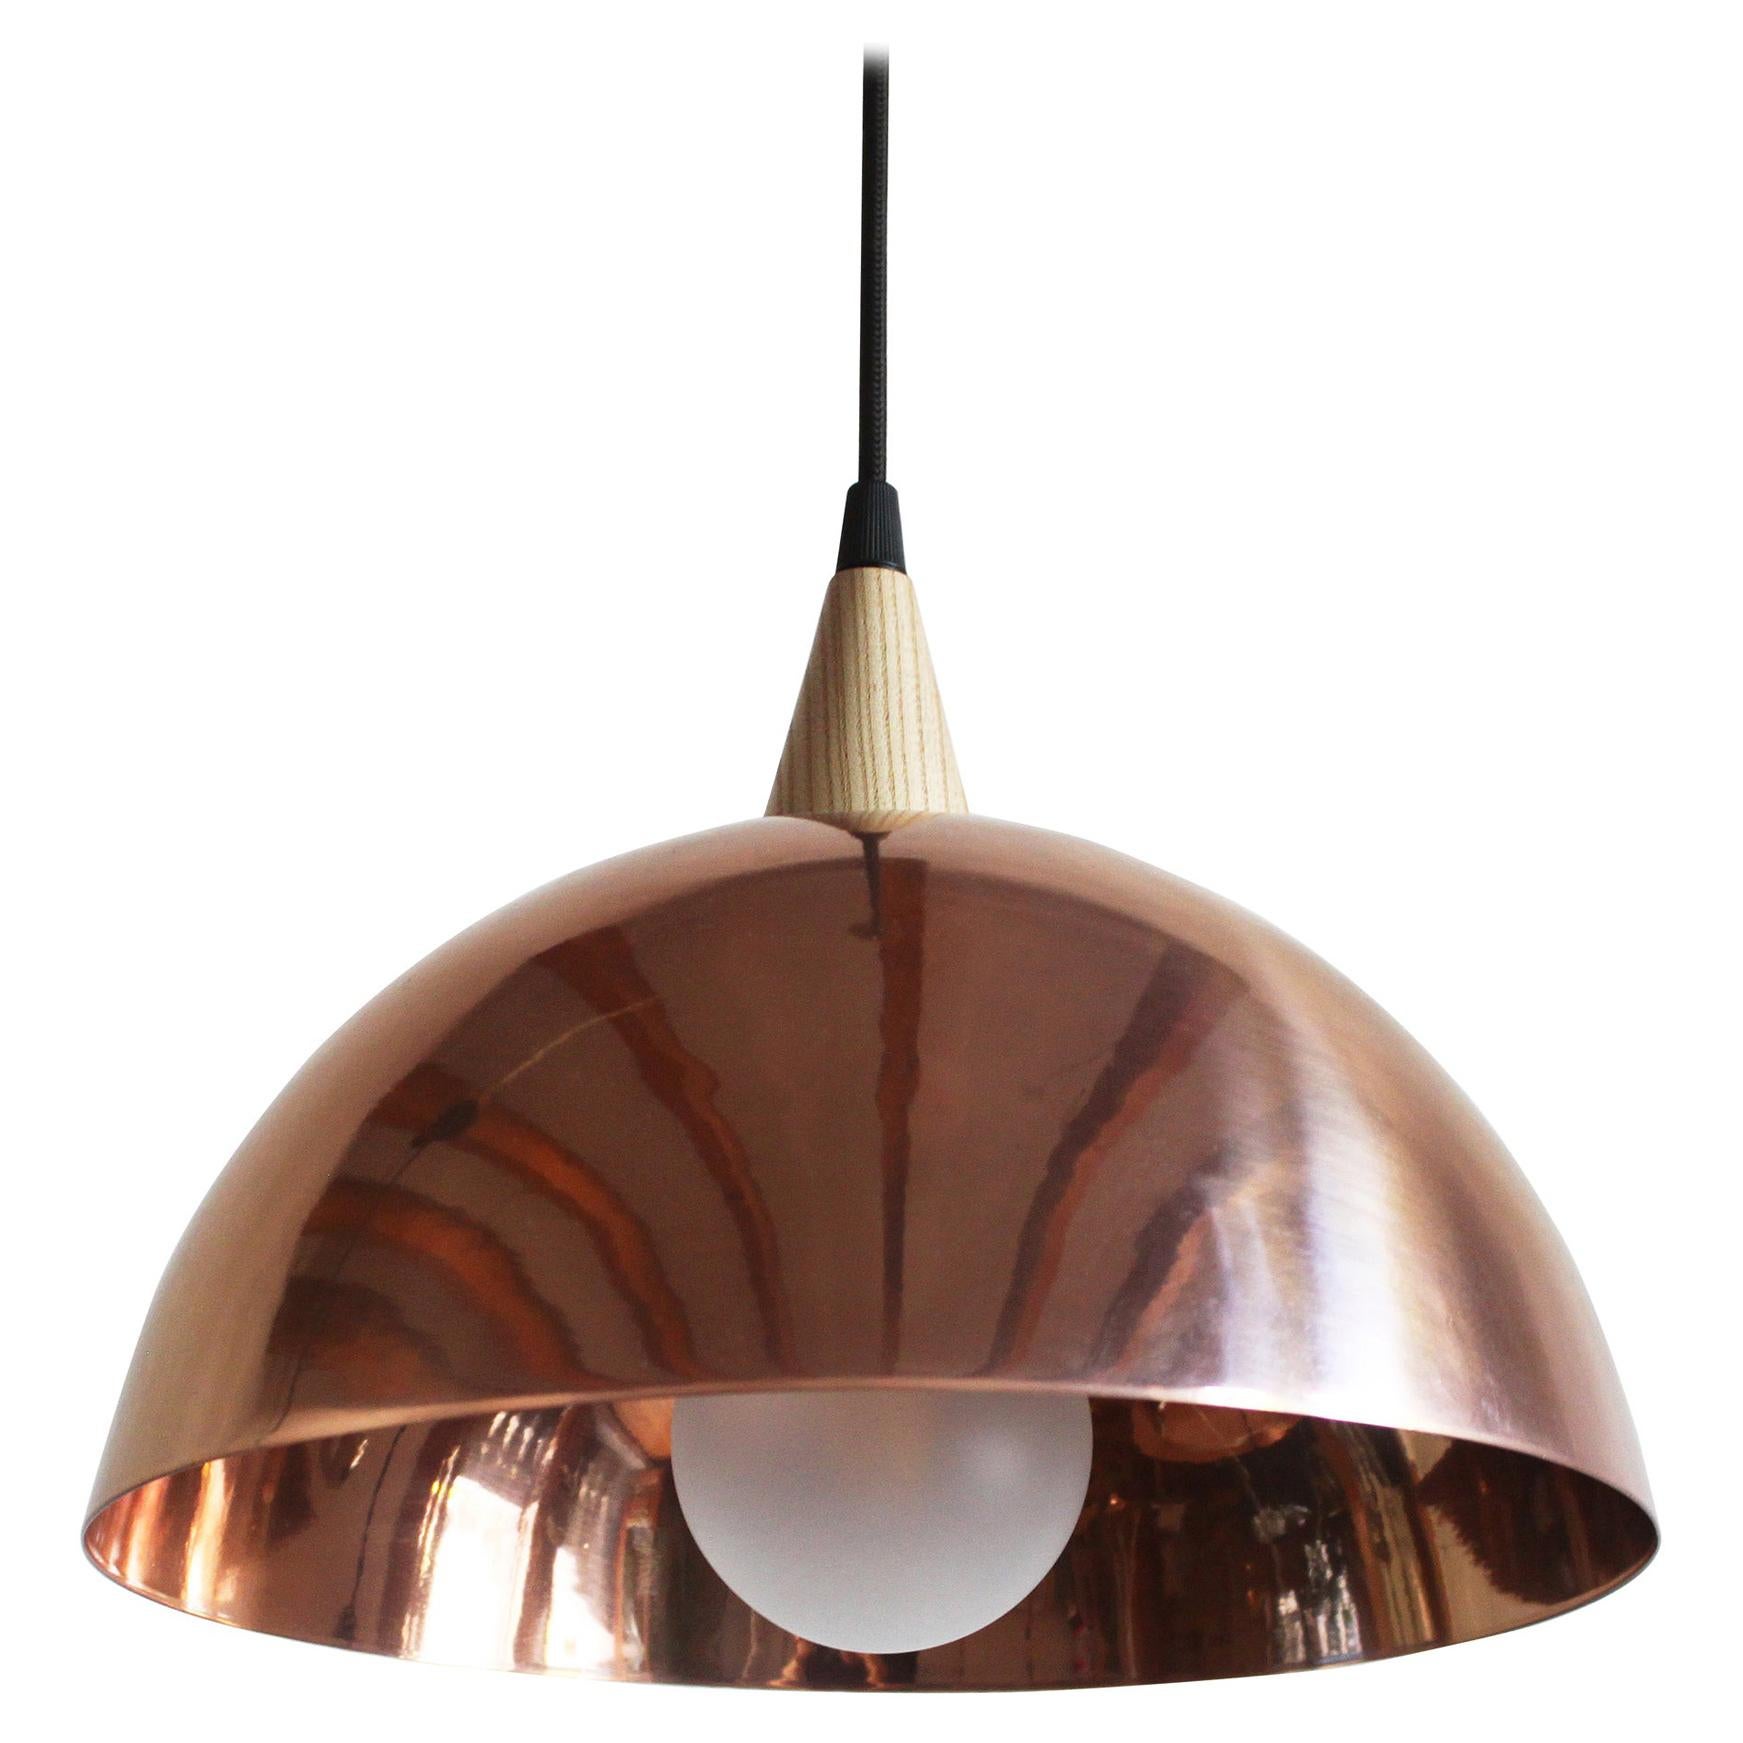 Domo Abajo 60 Pendant Lamp, Maria Beckmann, Represented by Tuleste Factory For Sale